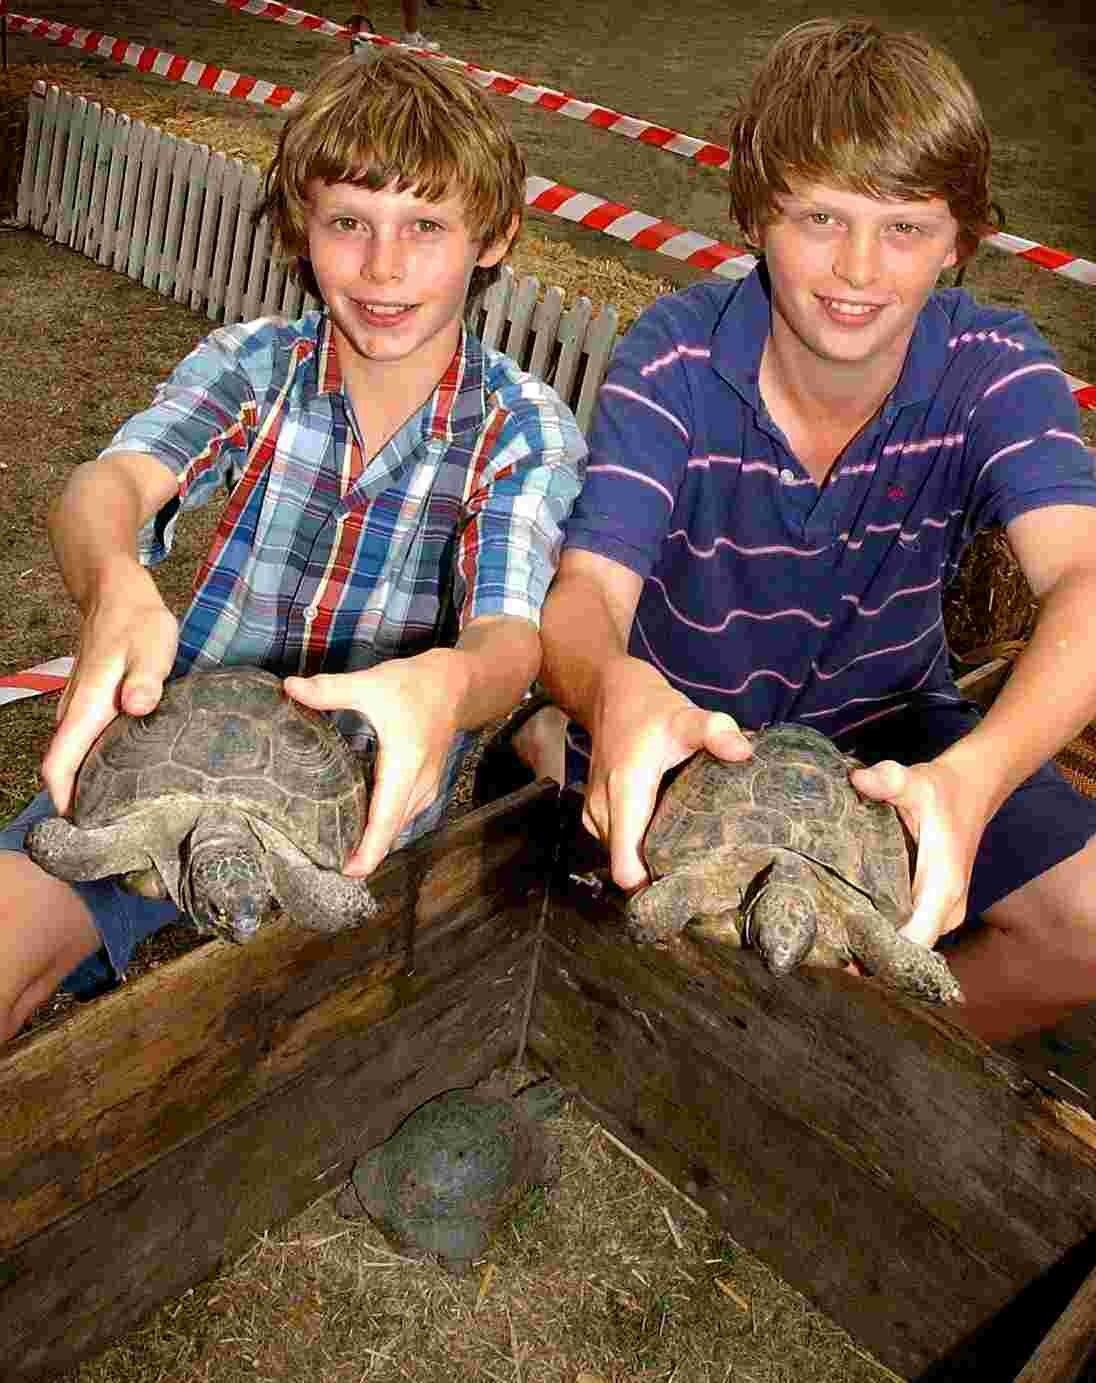 St Mary Bourne Fete 2006 - The tortoises being shown at the parade ring before the race start